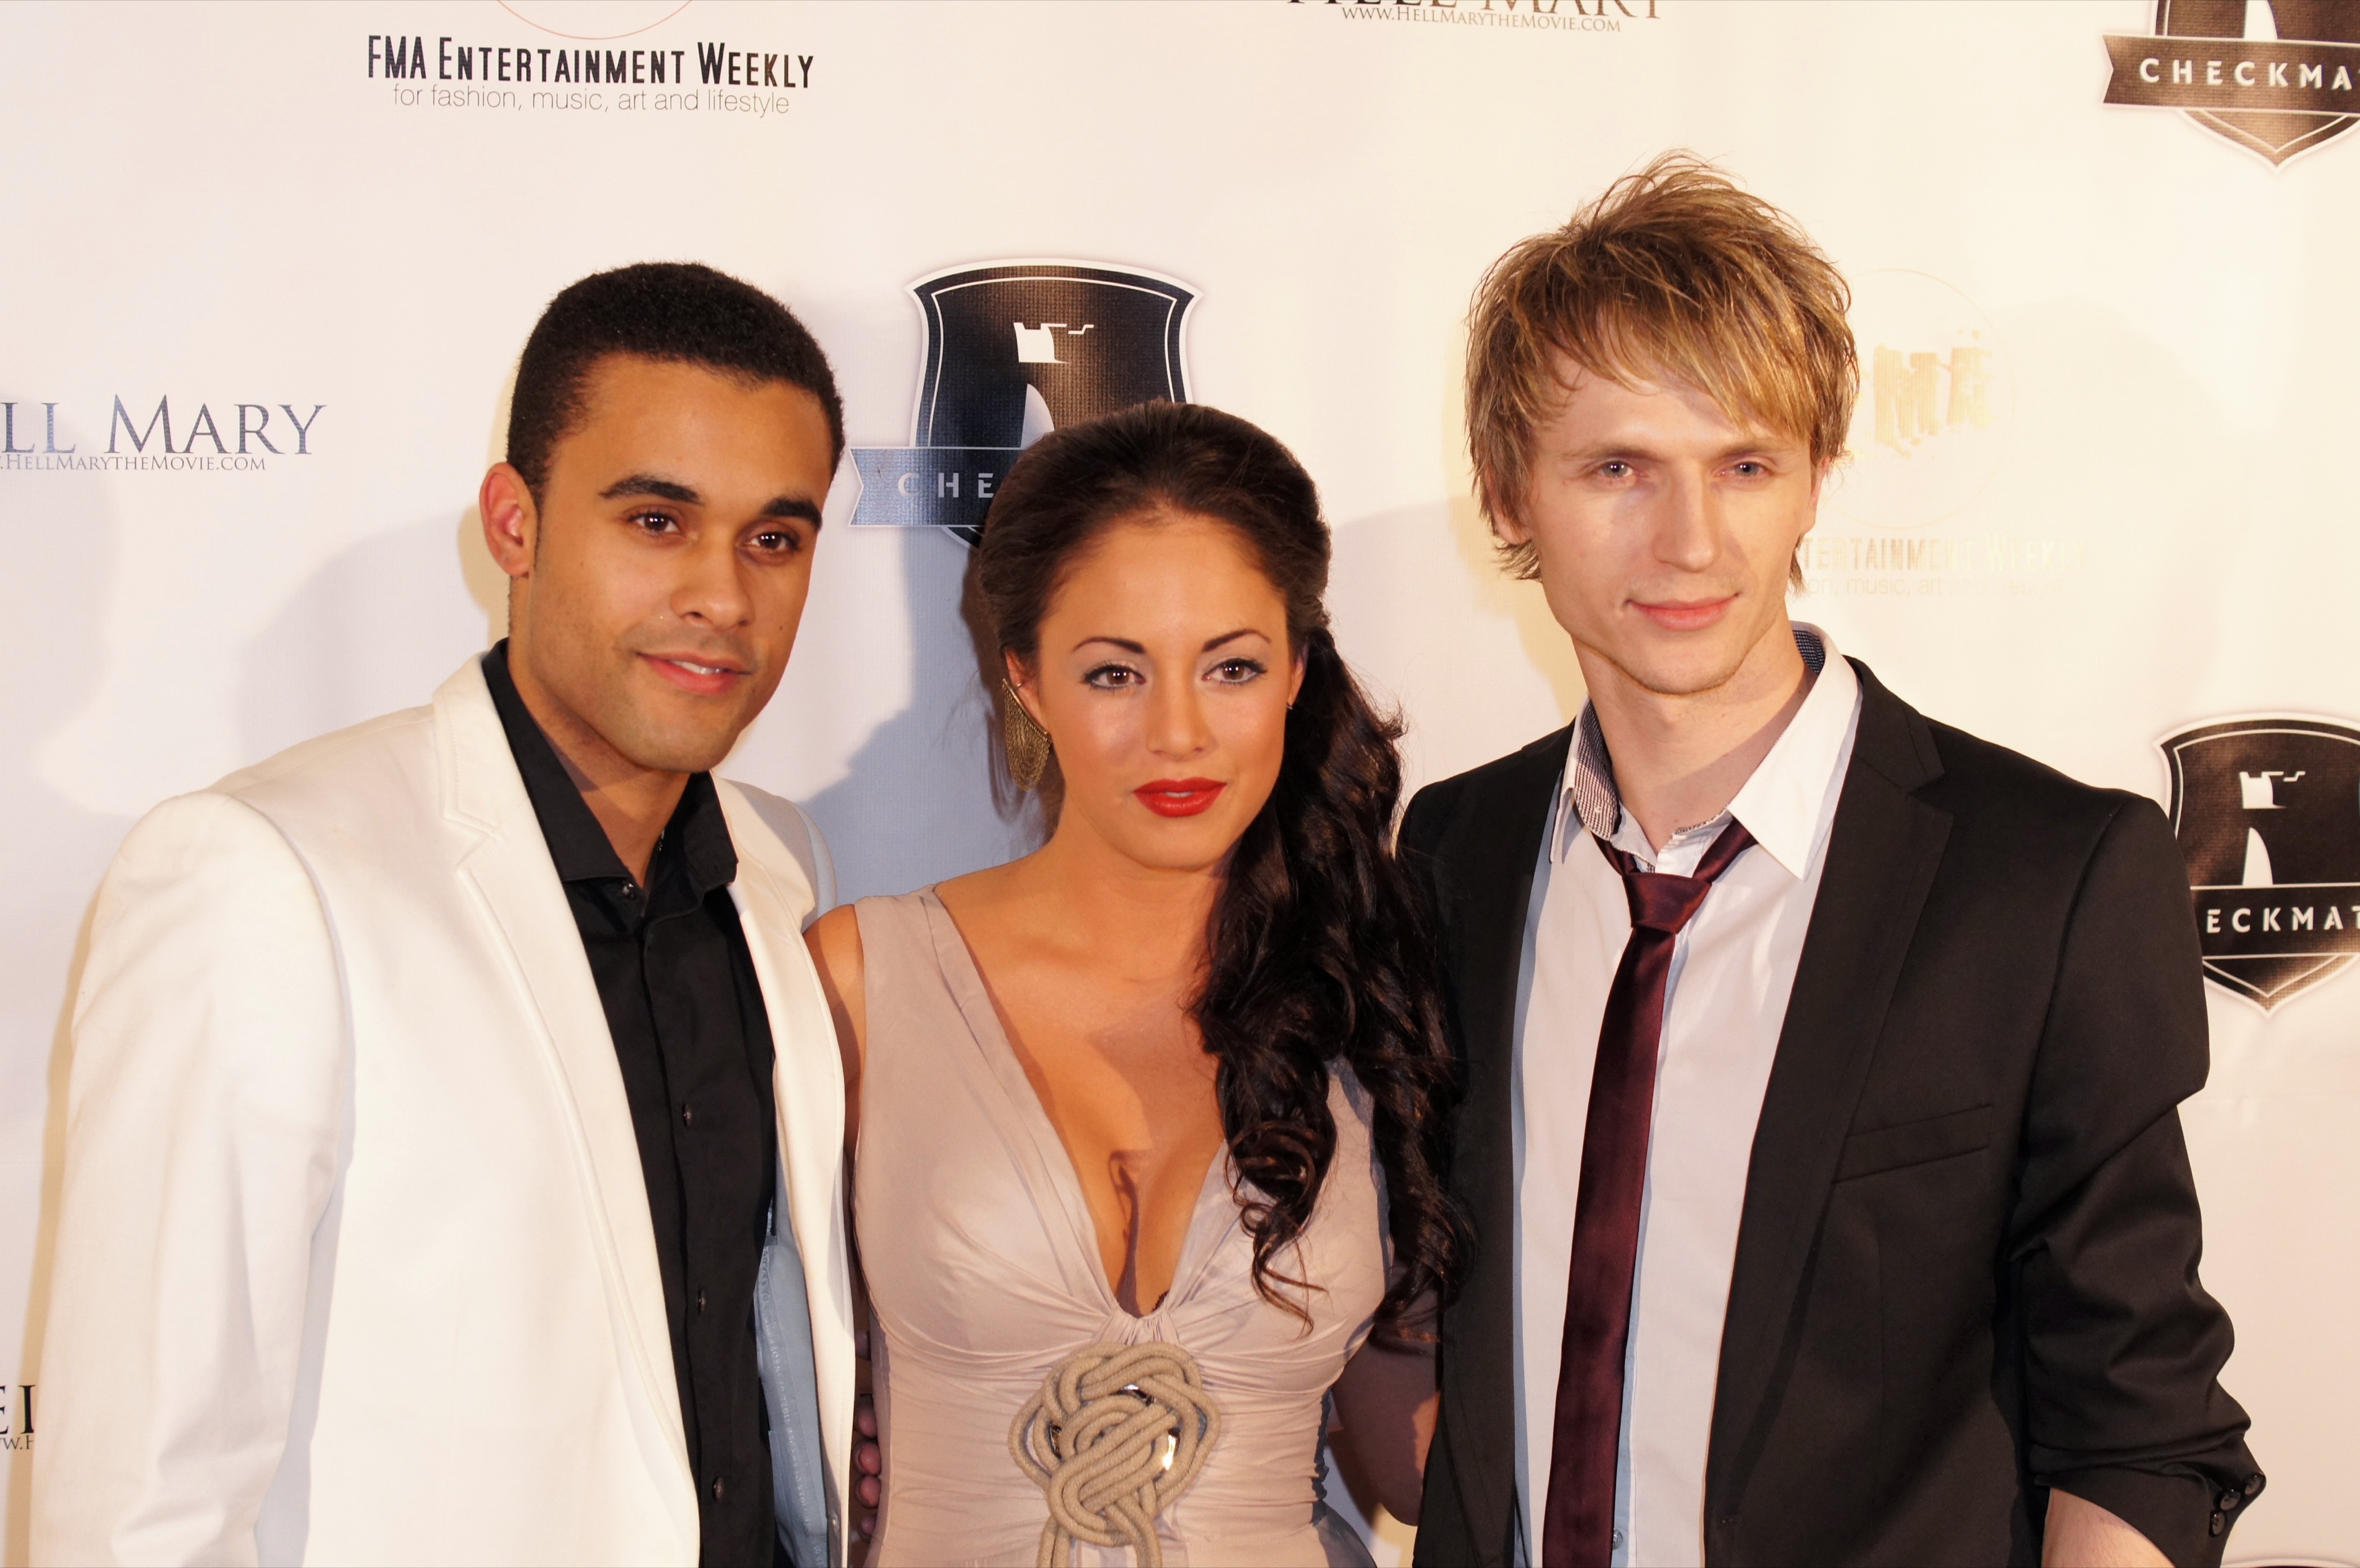 Nathan Witte, Raquel Riskin and Chad Rook at the BE SCENE Red Carpet Event promoting Hell Mary